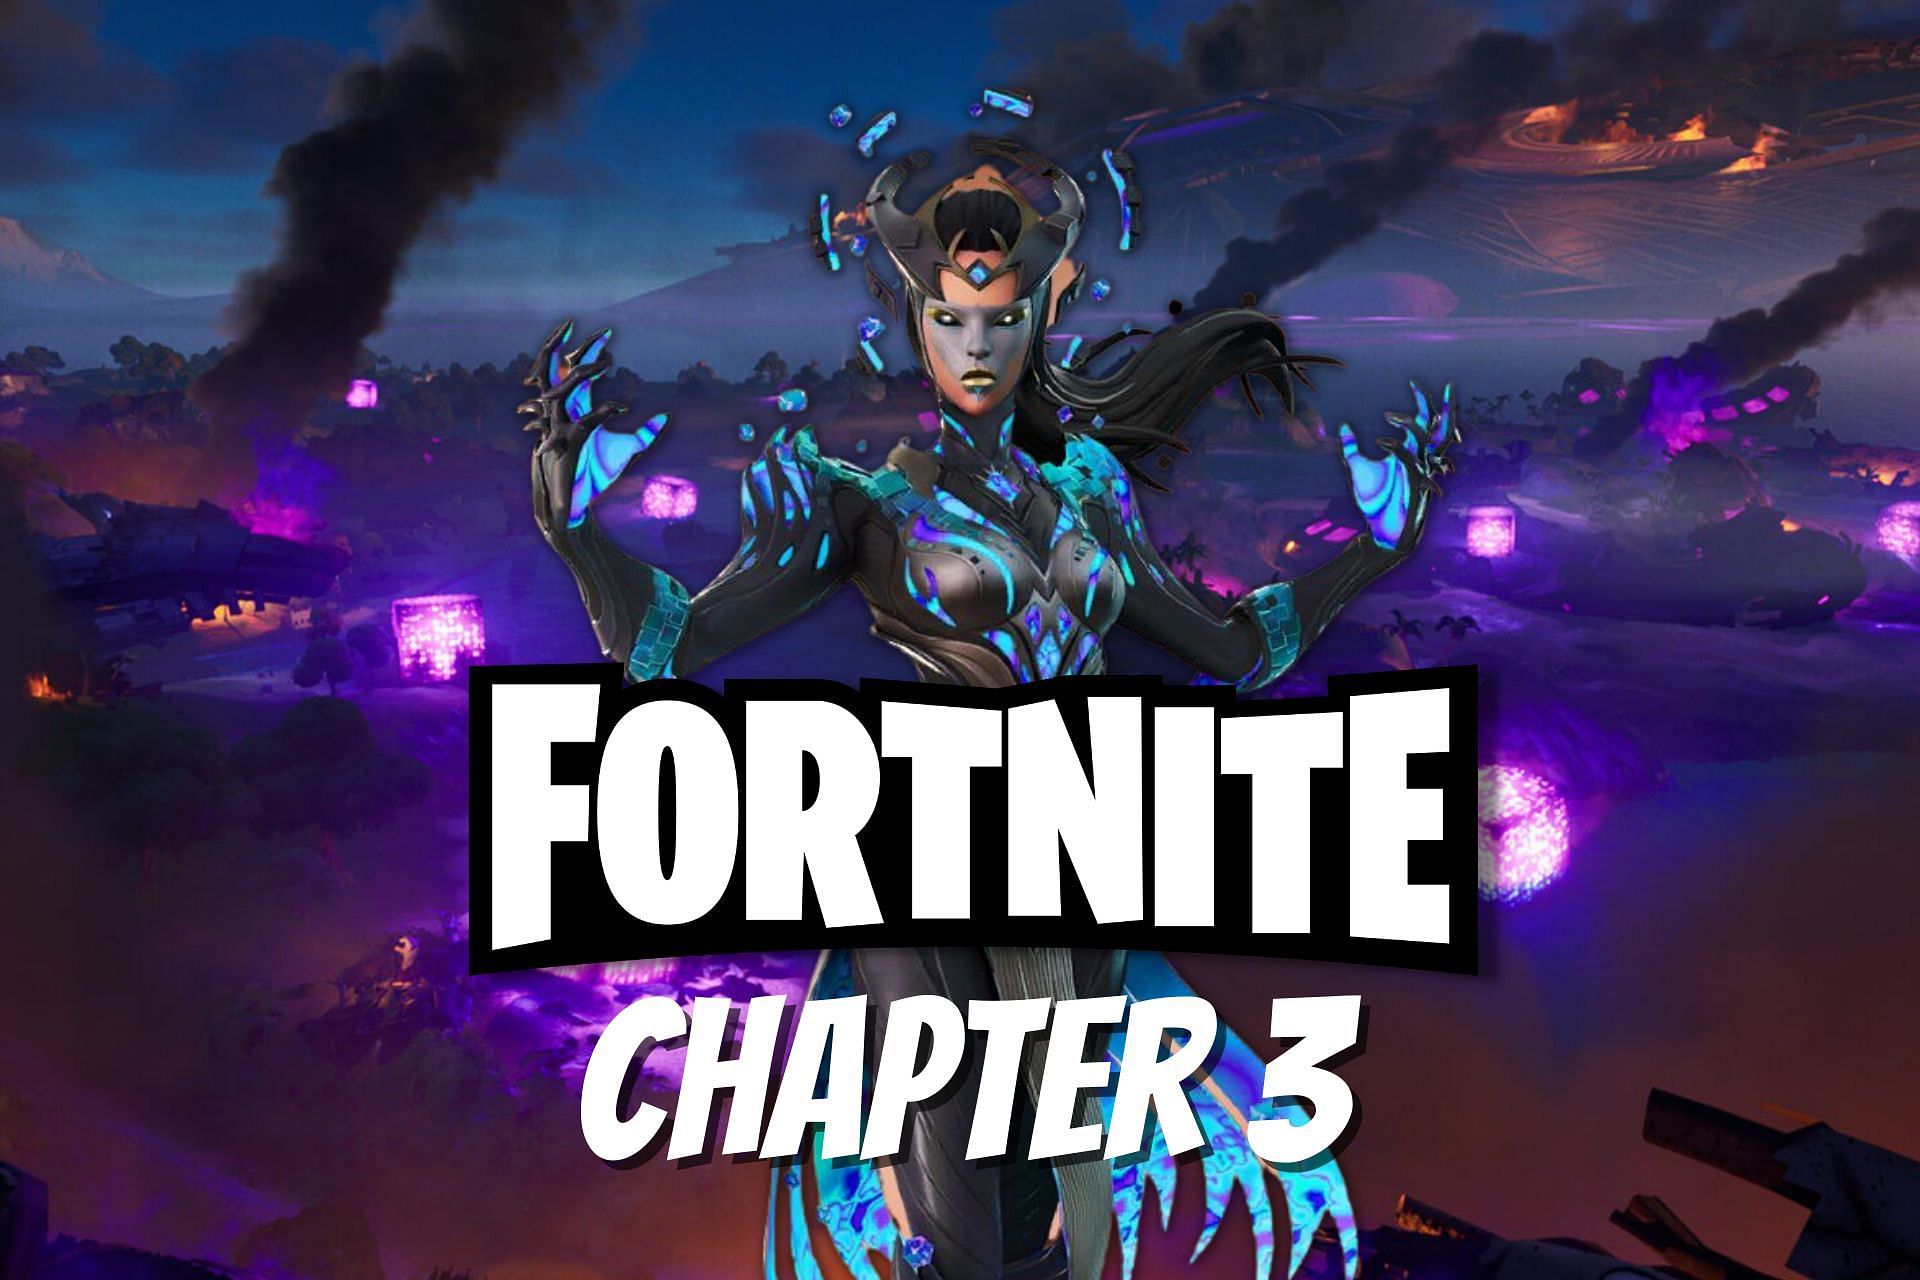 Fortnite Chapter 3 is closer than fans expected (Image via Sportskeeda)